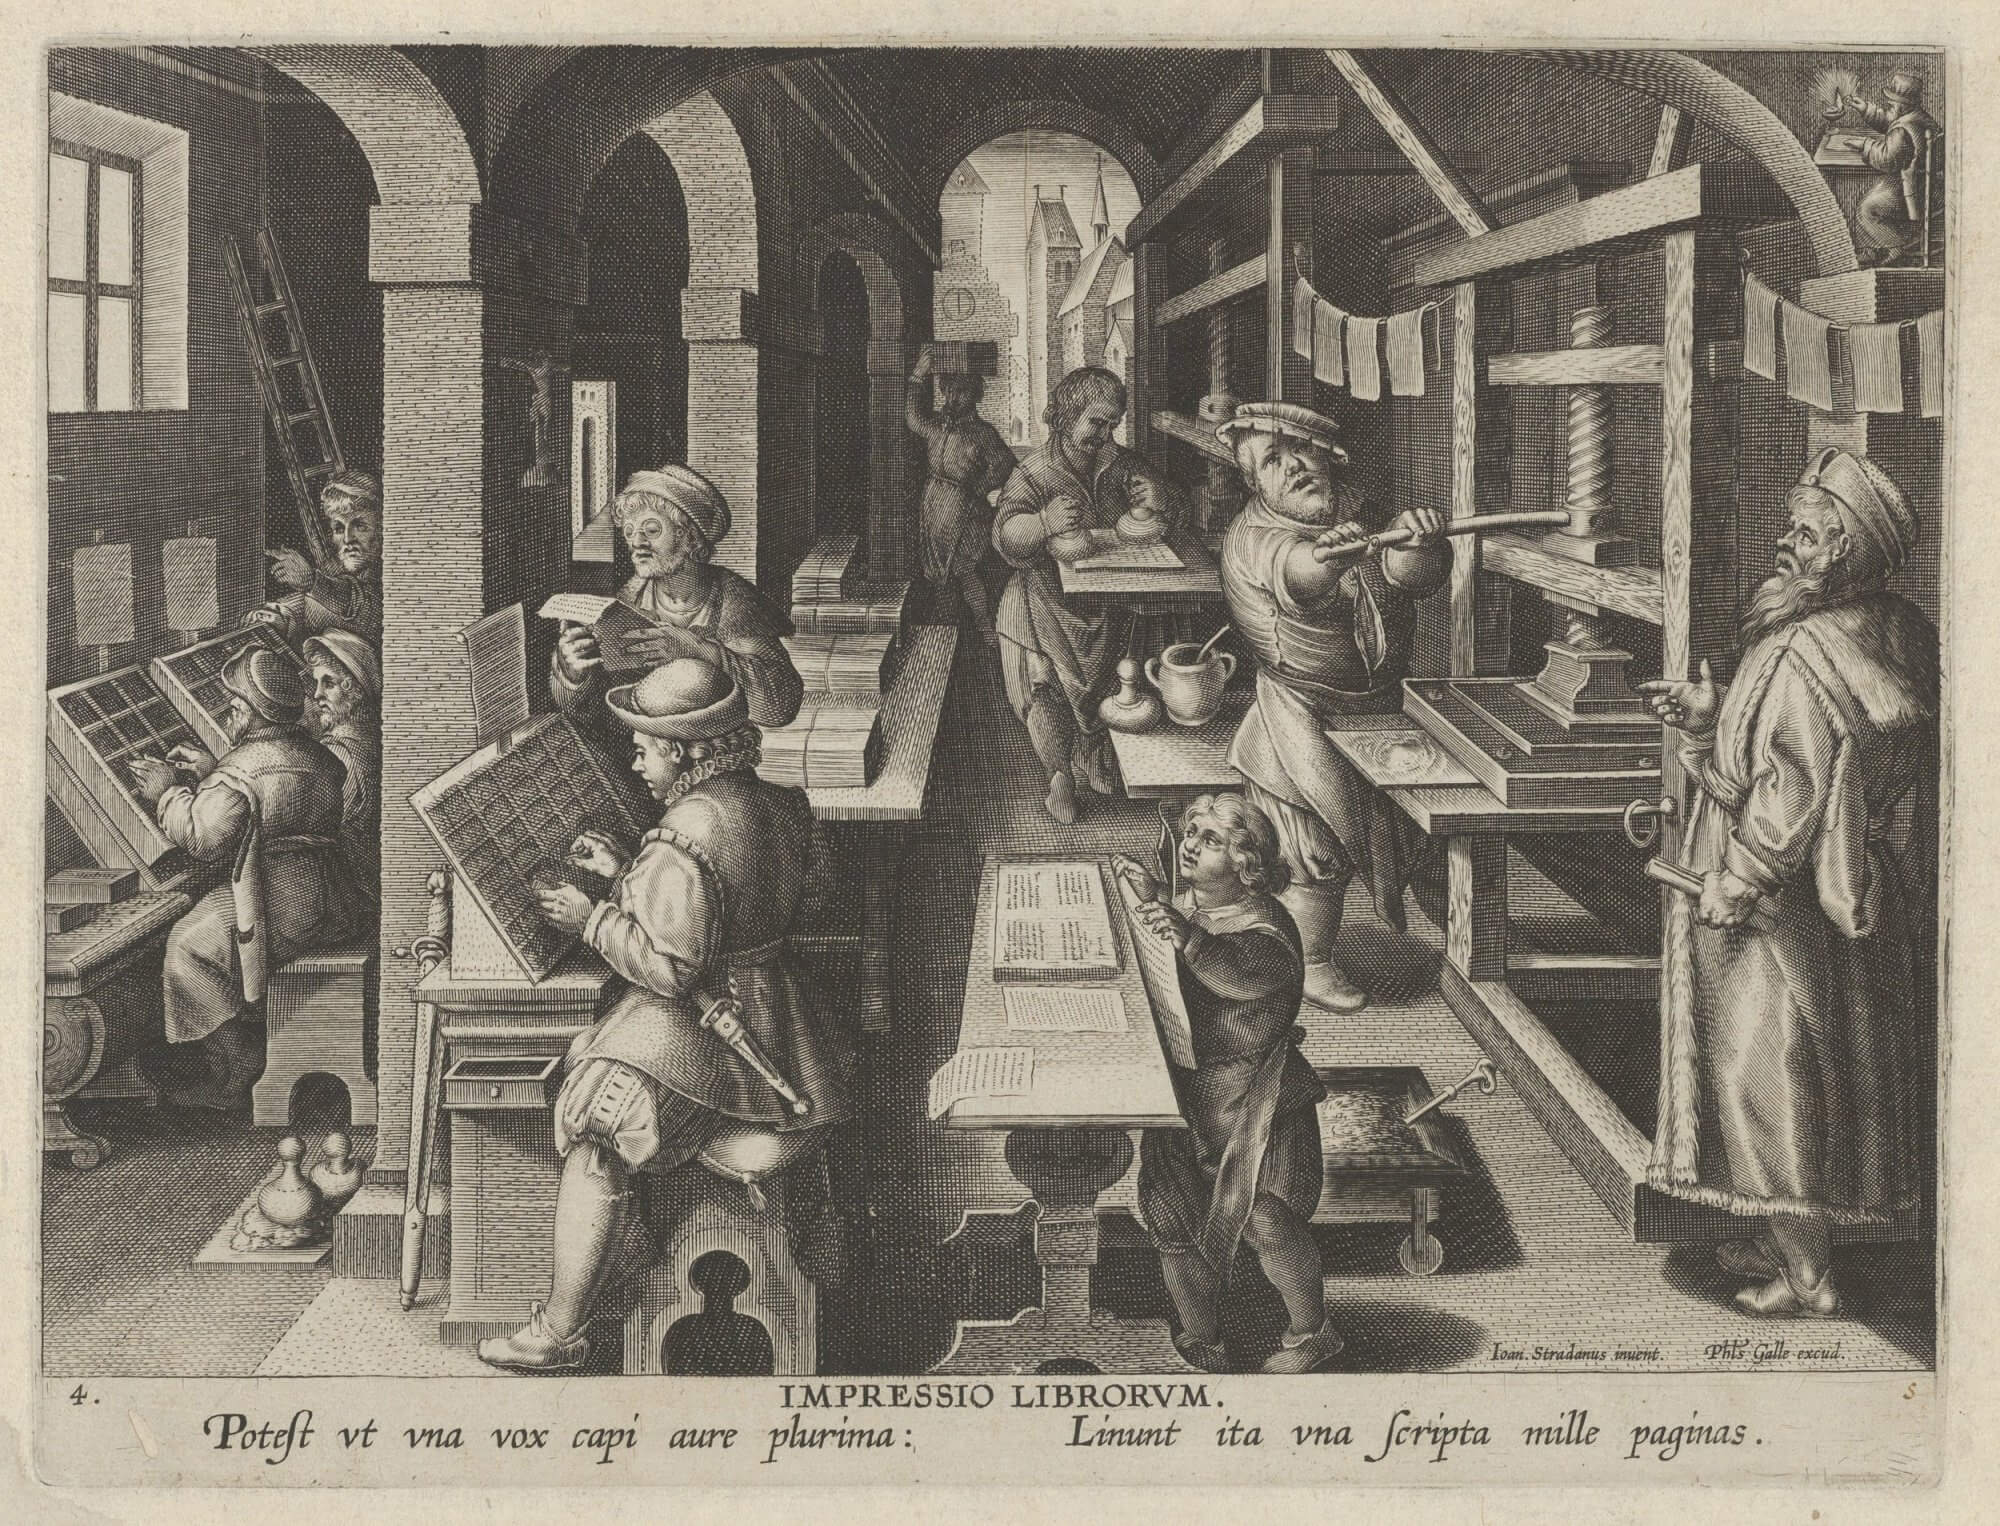 In this illustration from the series The Inventions of Modern Times, you can see the full range of activities associated with common-press printing, from delivering blank paper to proofreading printed sheets.